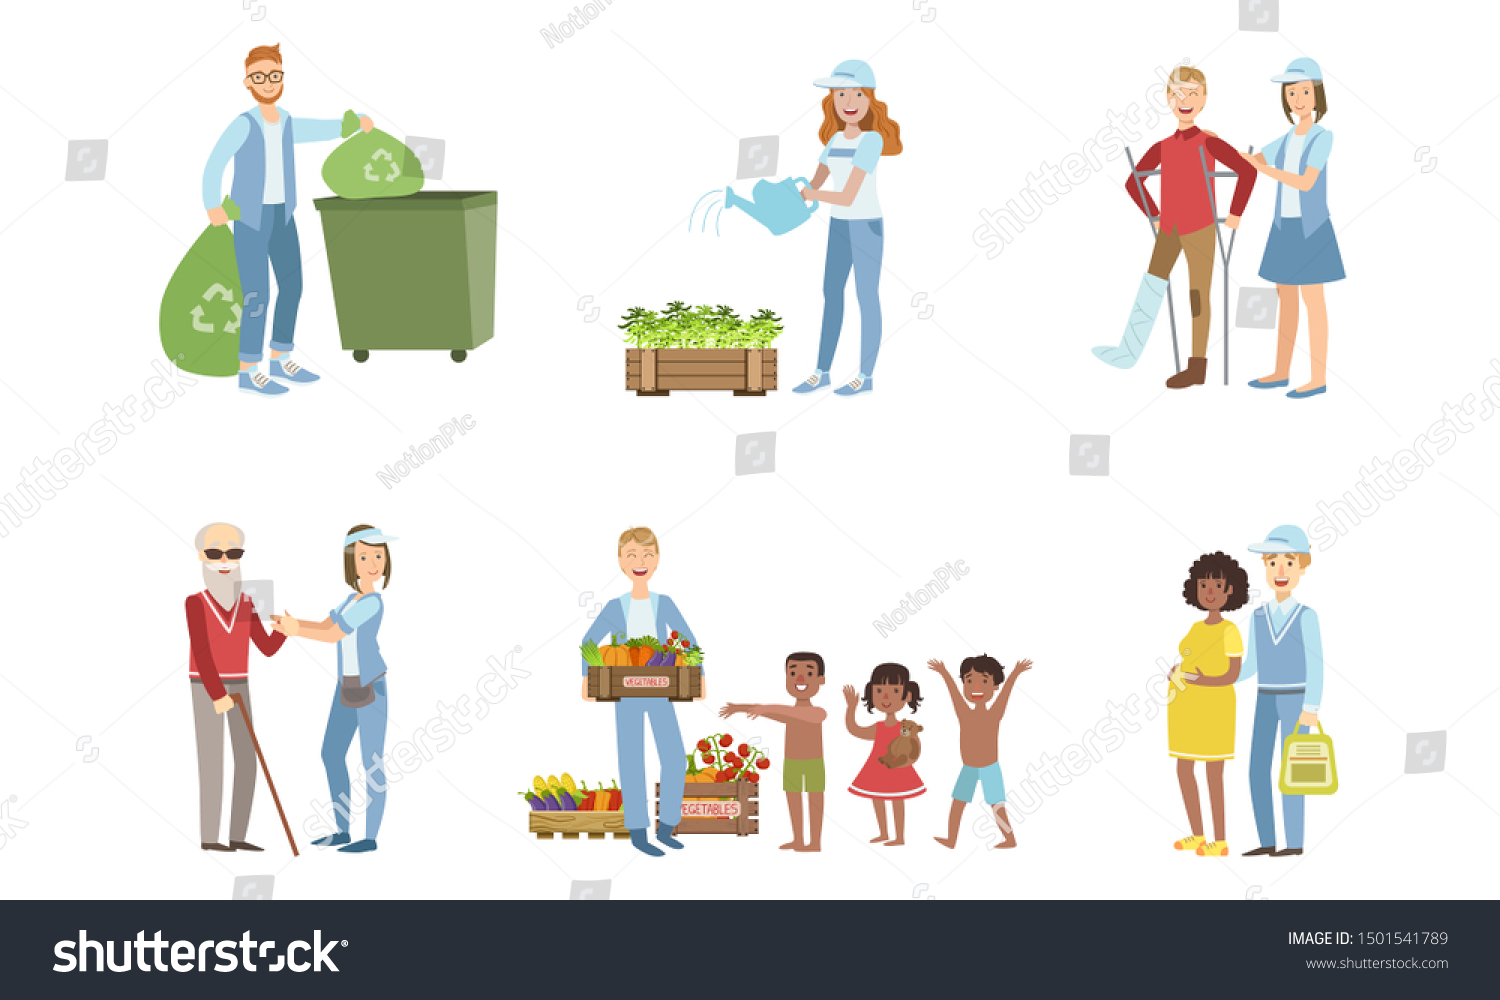 SVG of Volunteers at Work Set, Young Men and Women Collecting Garbage, Watering Plants. Helping Disabled and Elderly People, Feeding Hungry and Needy Kids. Vector Illustration. svg